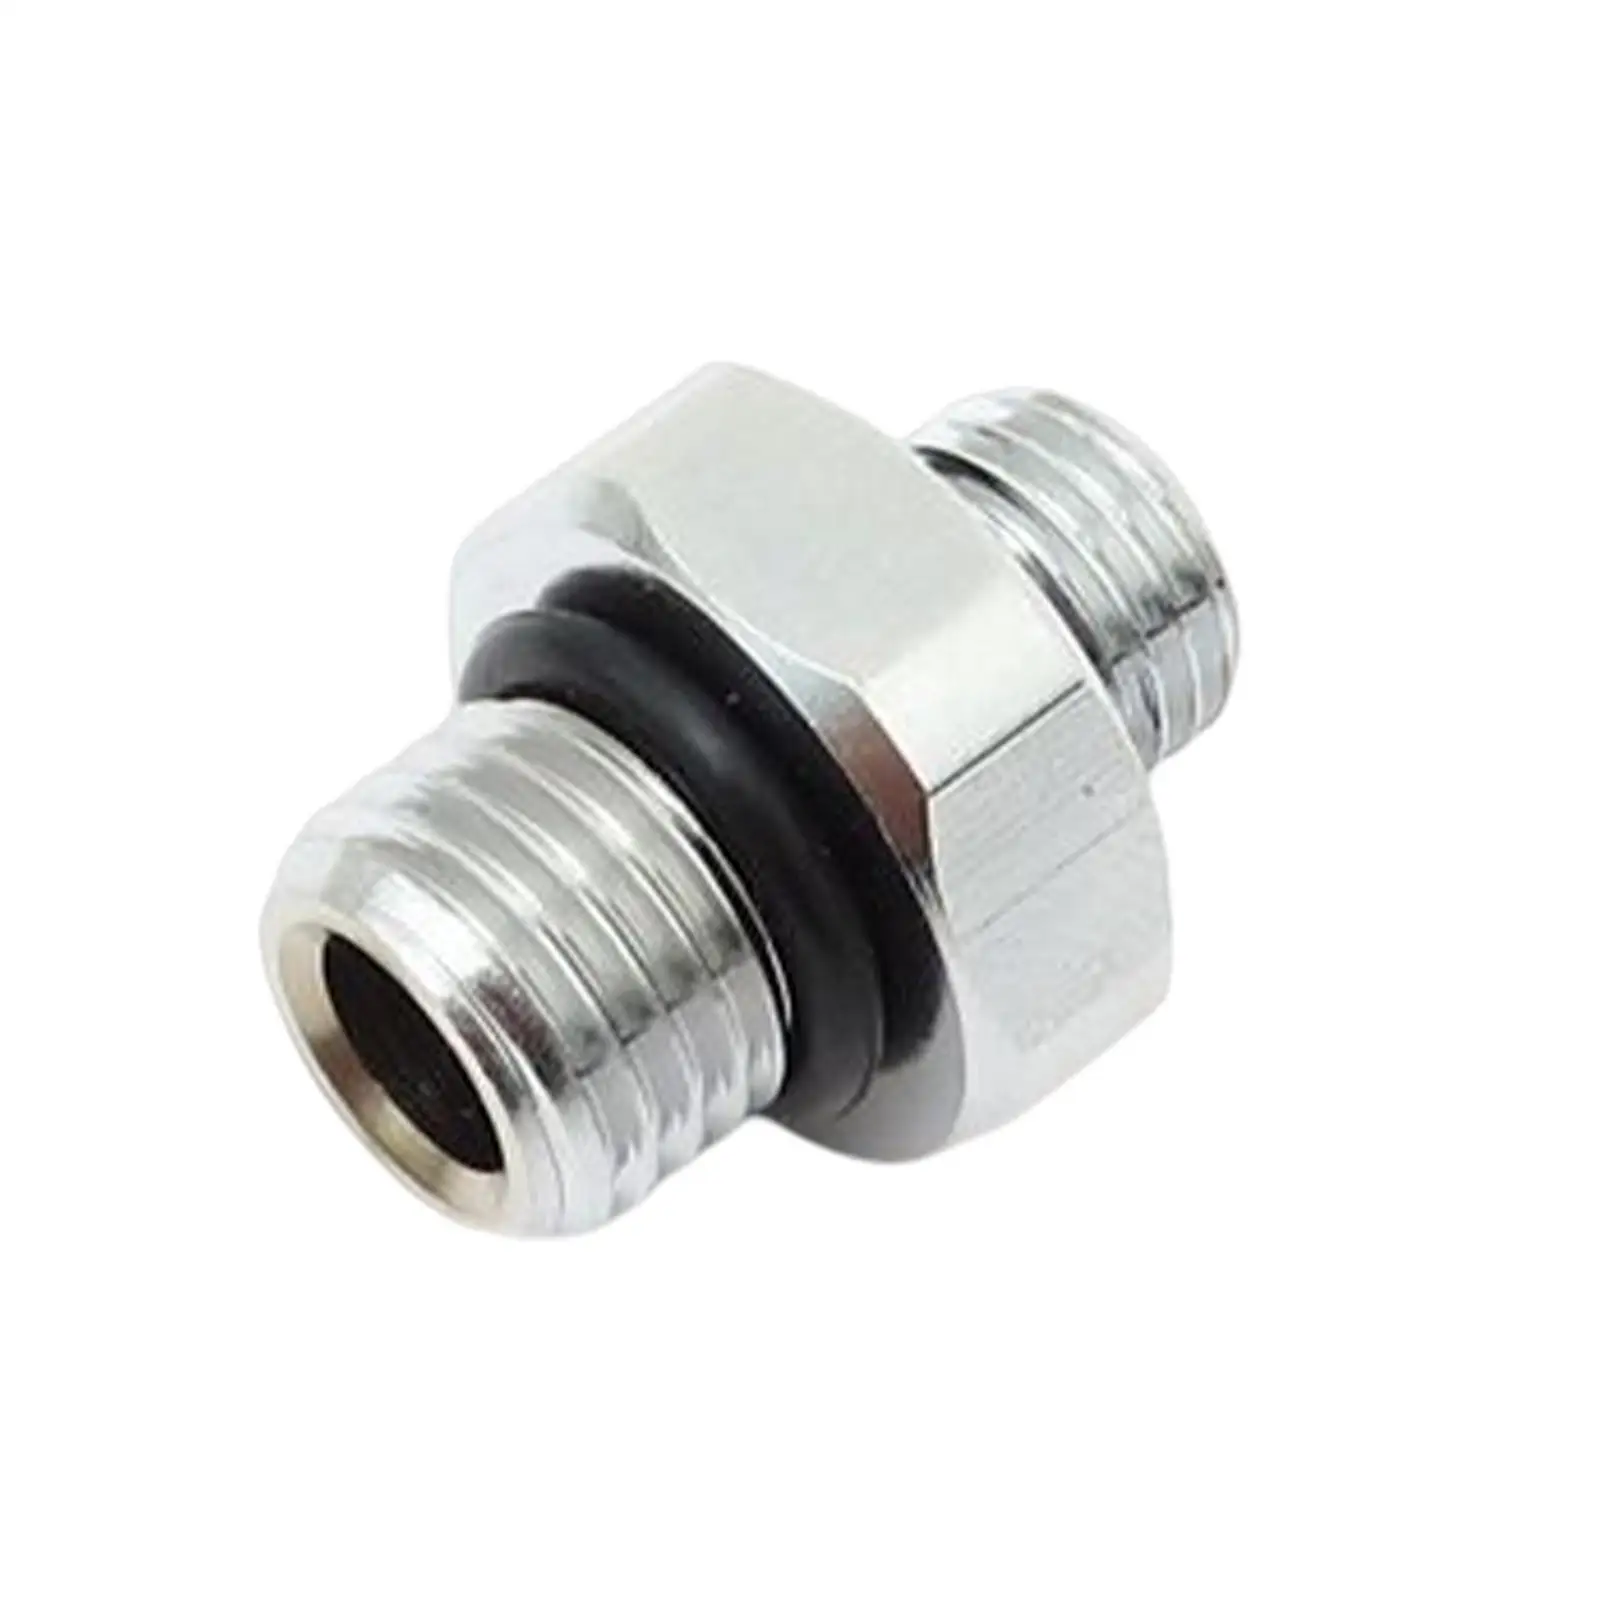 7/16-20HP and 3/8-24LP BCD Connector Replacement Scuba Male Screw for Diving